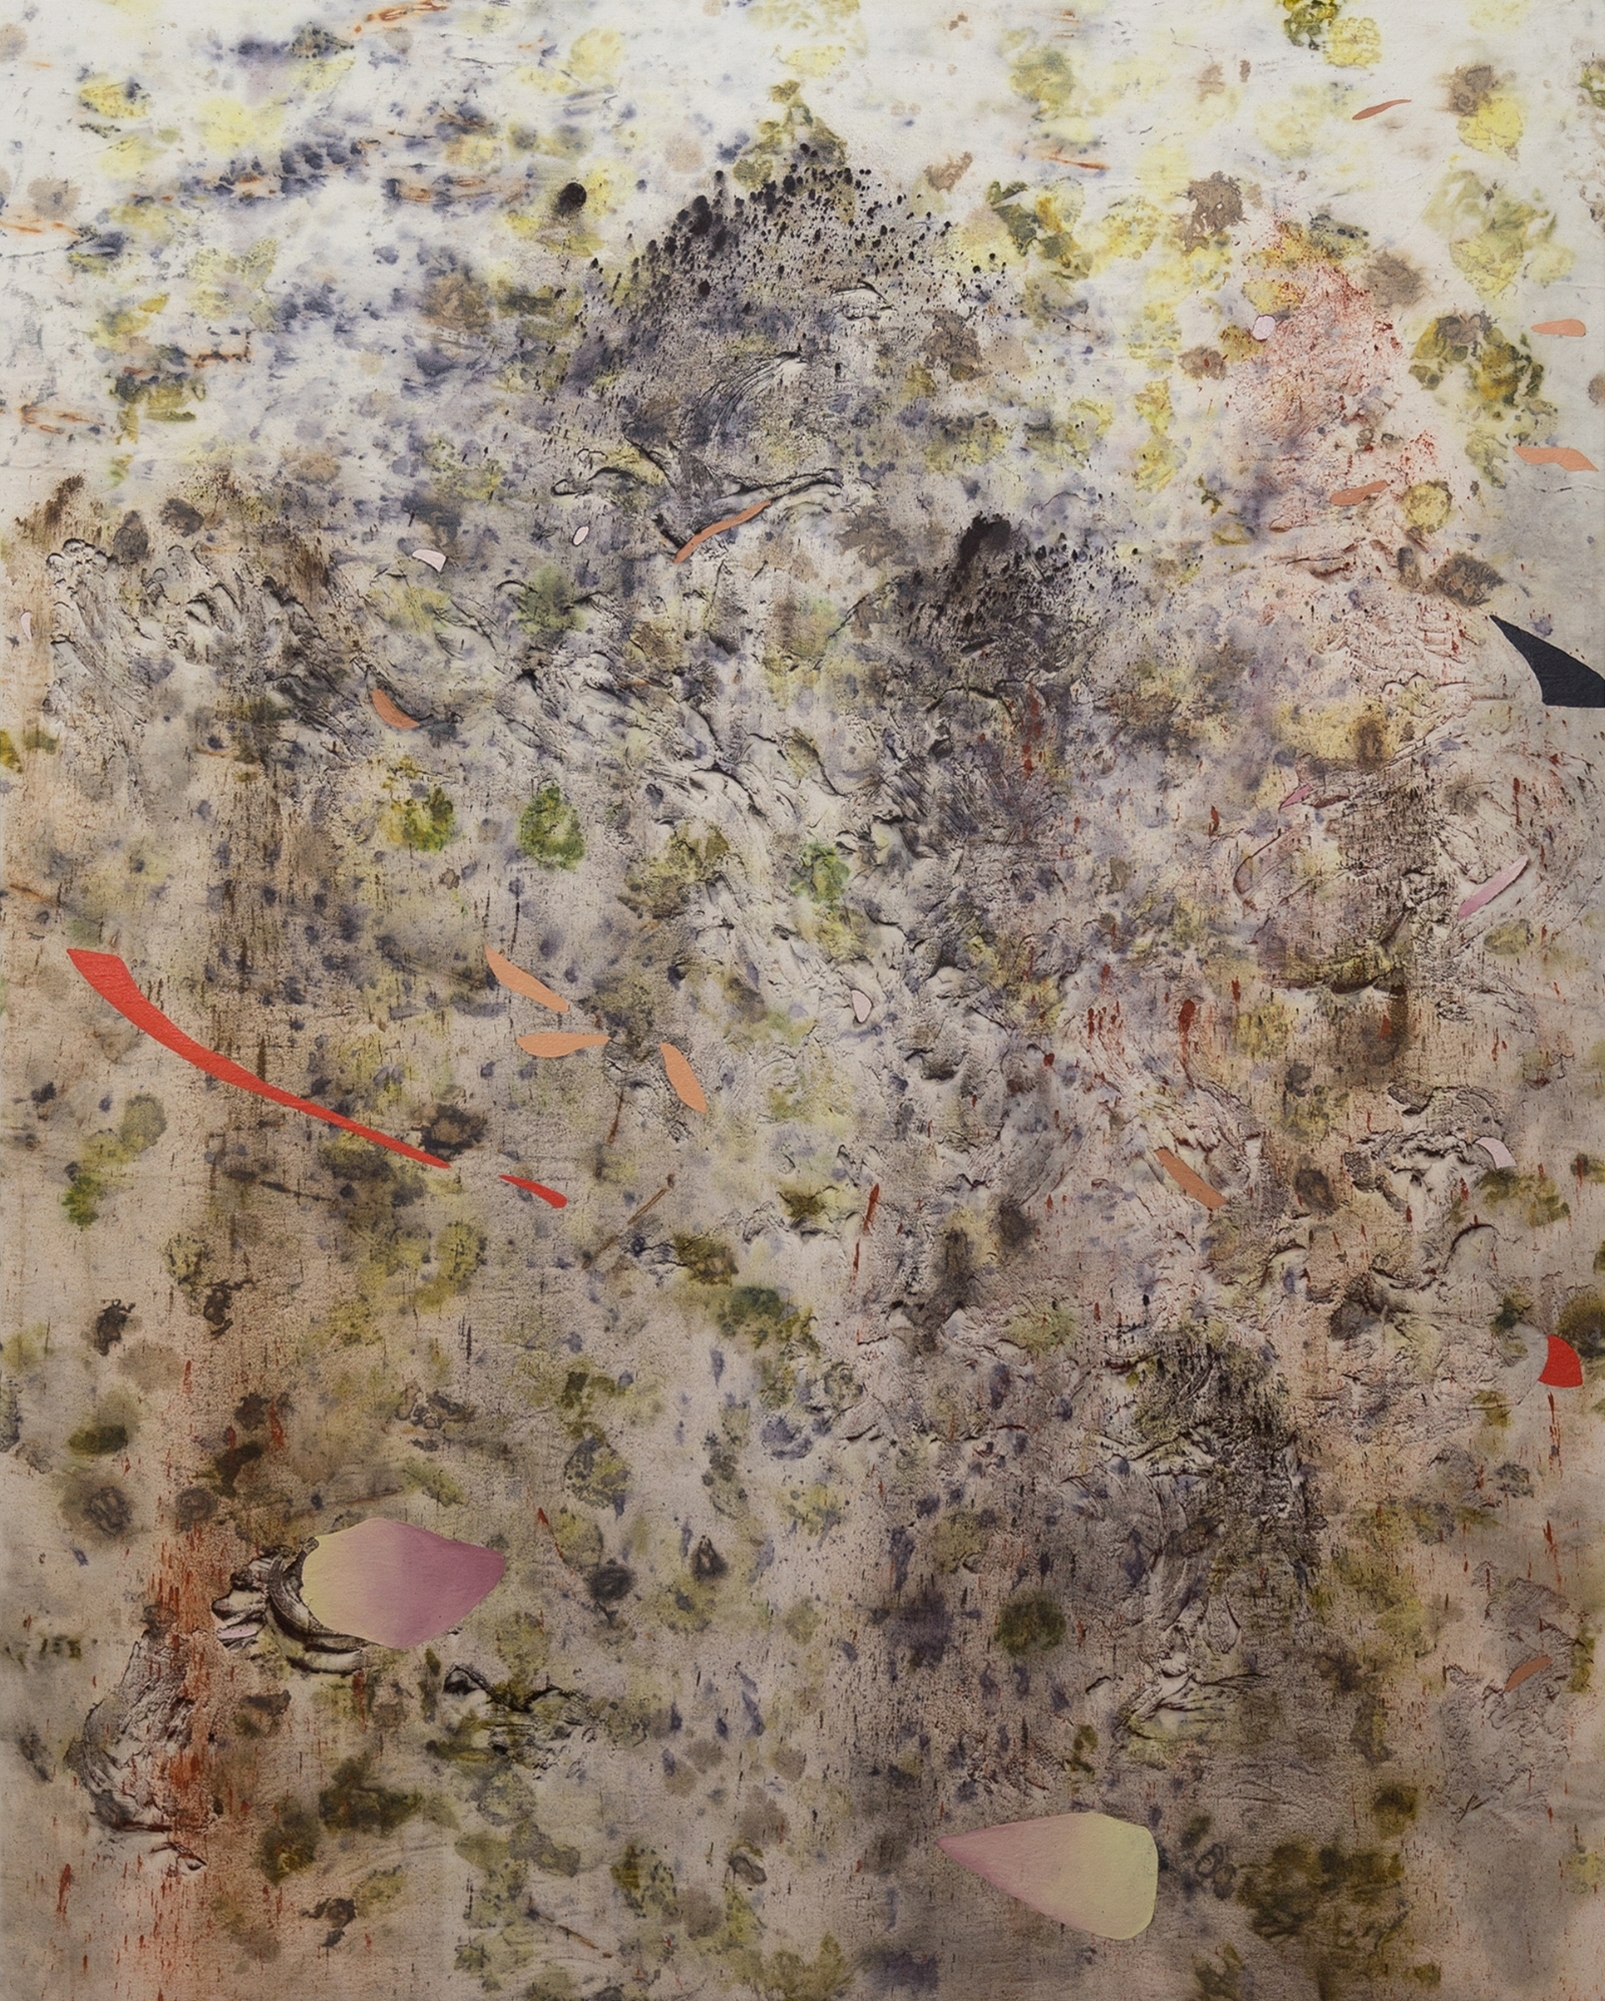  Mourning Humus, Cold Wax Medium, Oil, Raw Pigments, Sand, Red Earth, and Various Plant Materials (including Acorns, Avocado Pits, Ferns, Sumac Berries, Rose Petals, Onion Skins, Tansy Flower, Wildflowers, and Rusty Nails) on Canvas, 5x4 feet, 2018, 